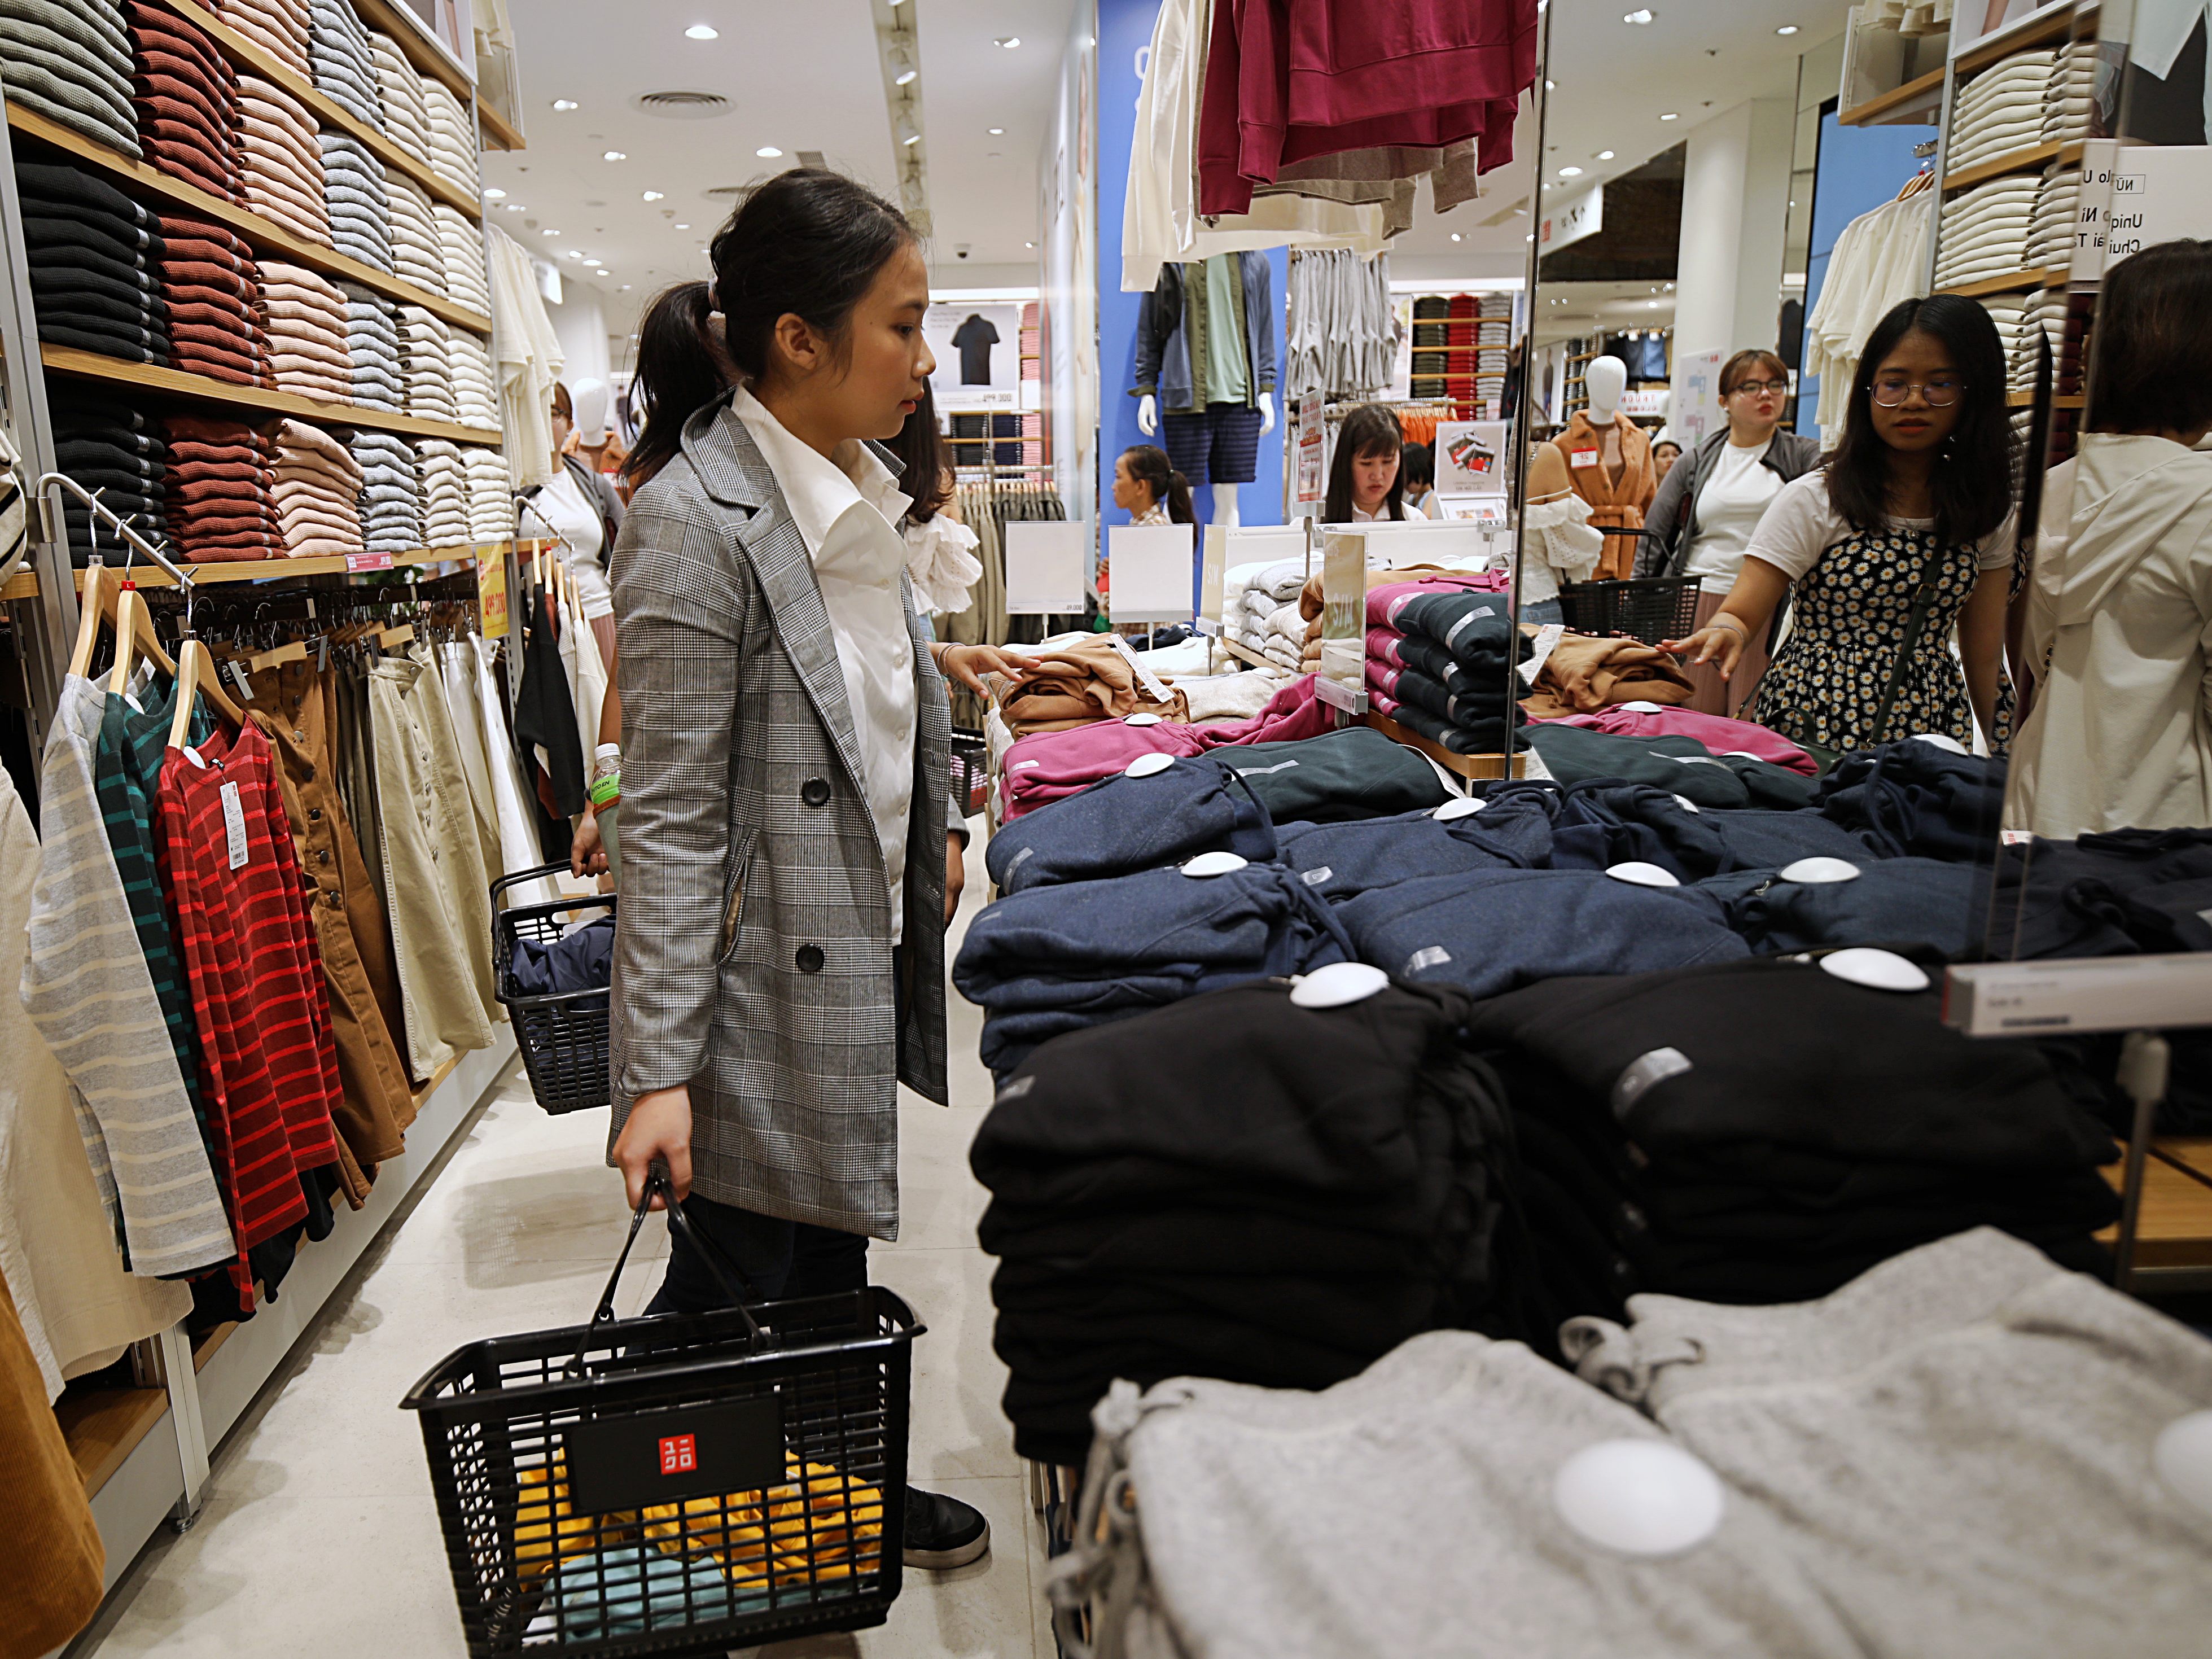 UNIQLO to open first Vietnam store this year